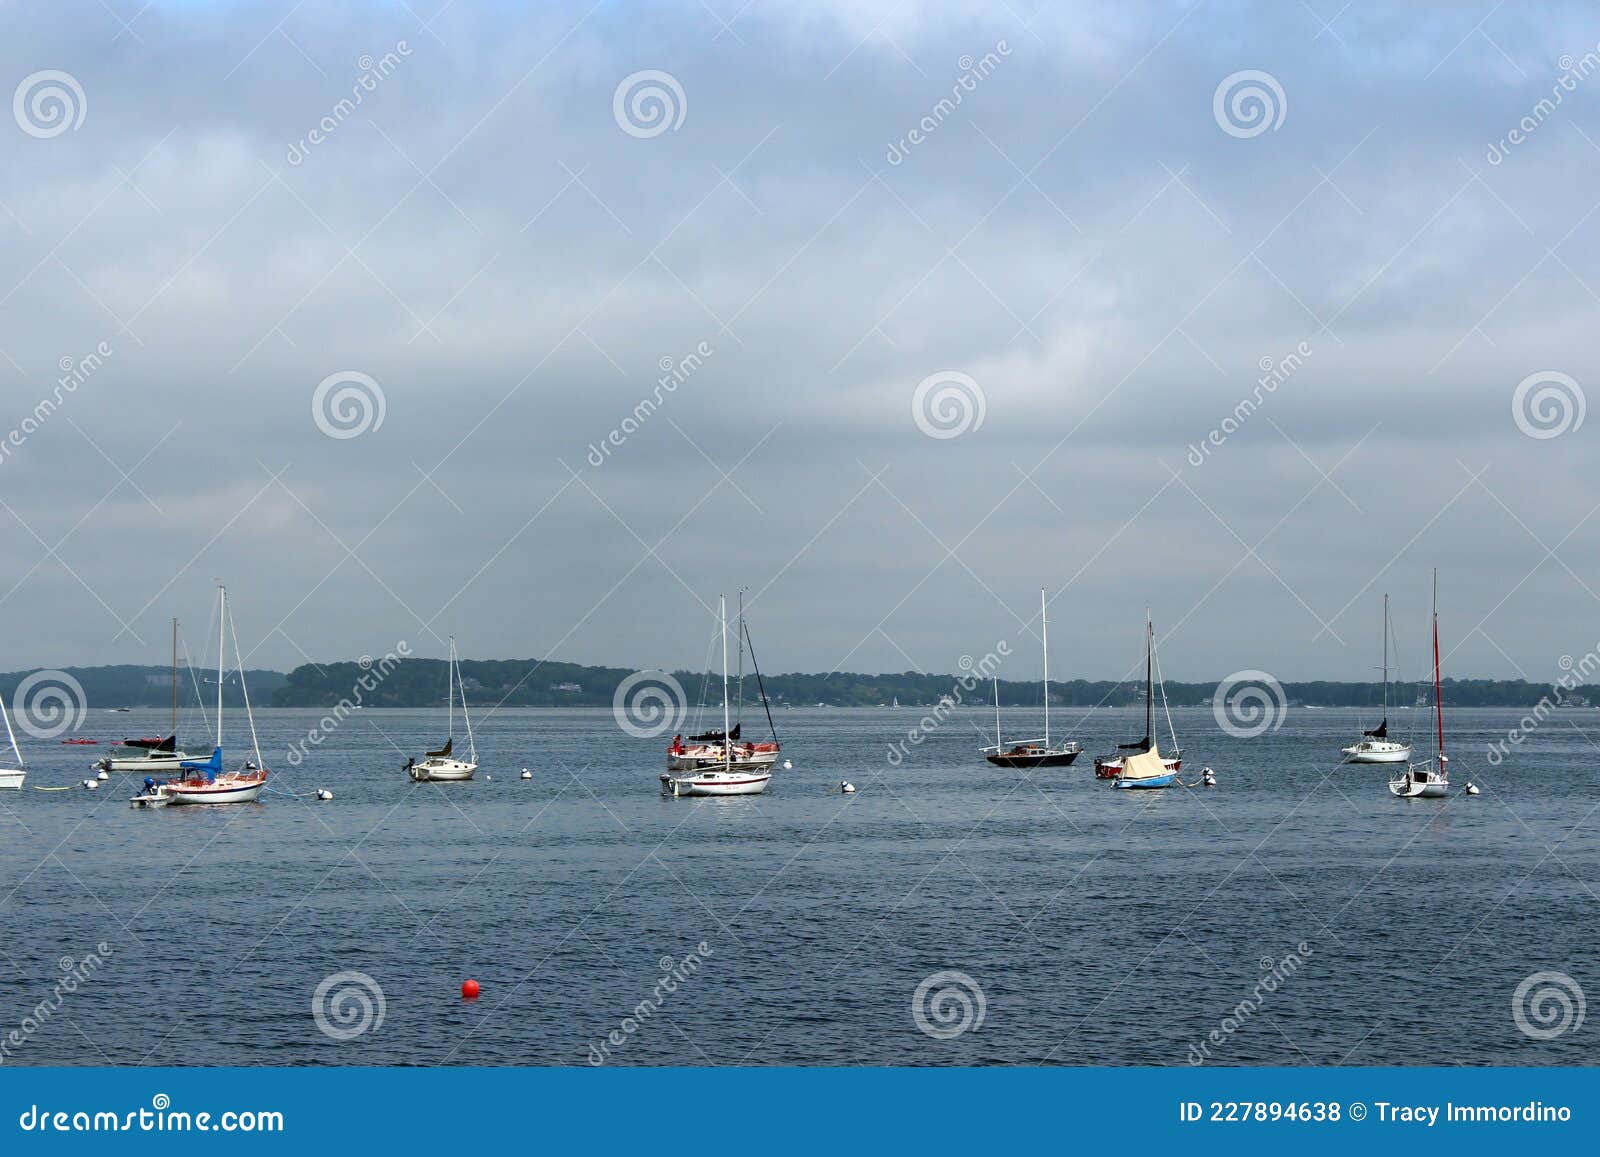 ten sailboats anchored out on lake mendota with kayakers in the background in madison, wisonsin